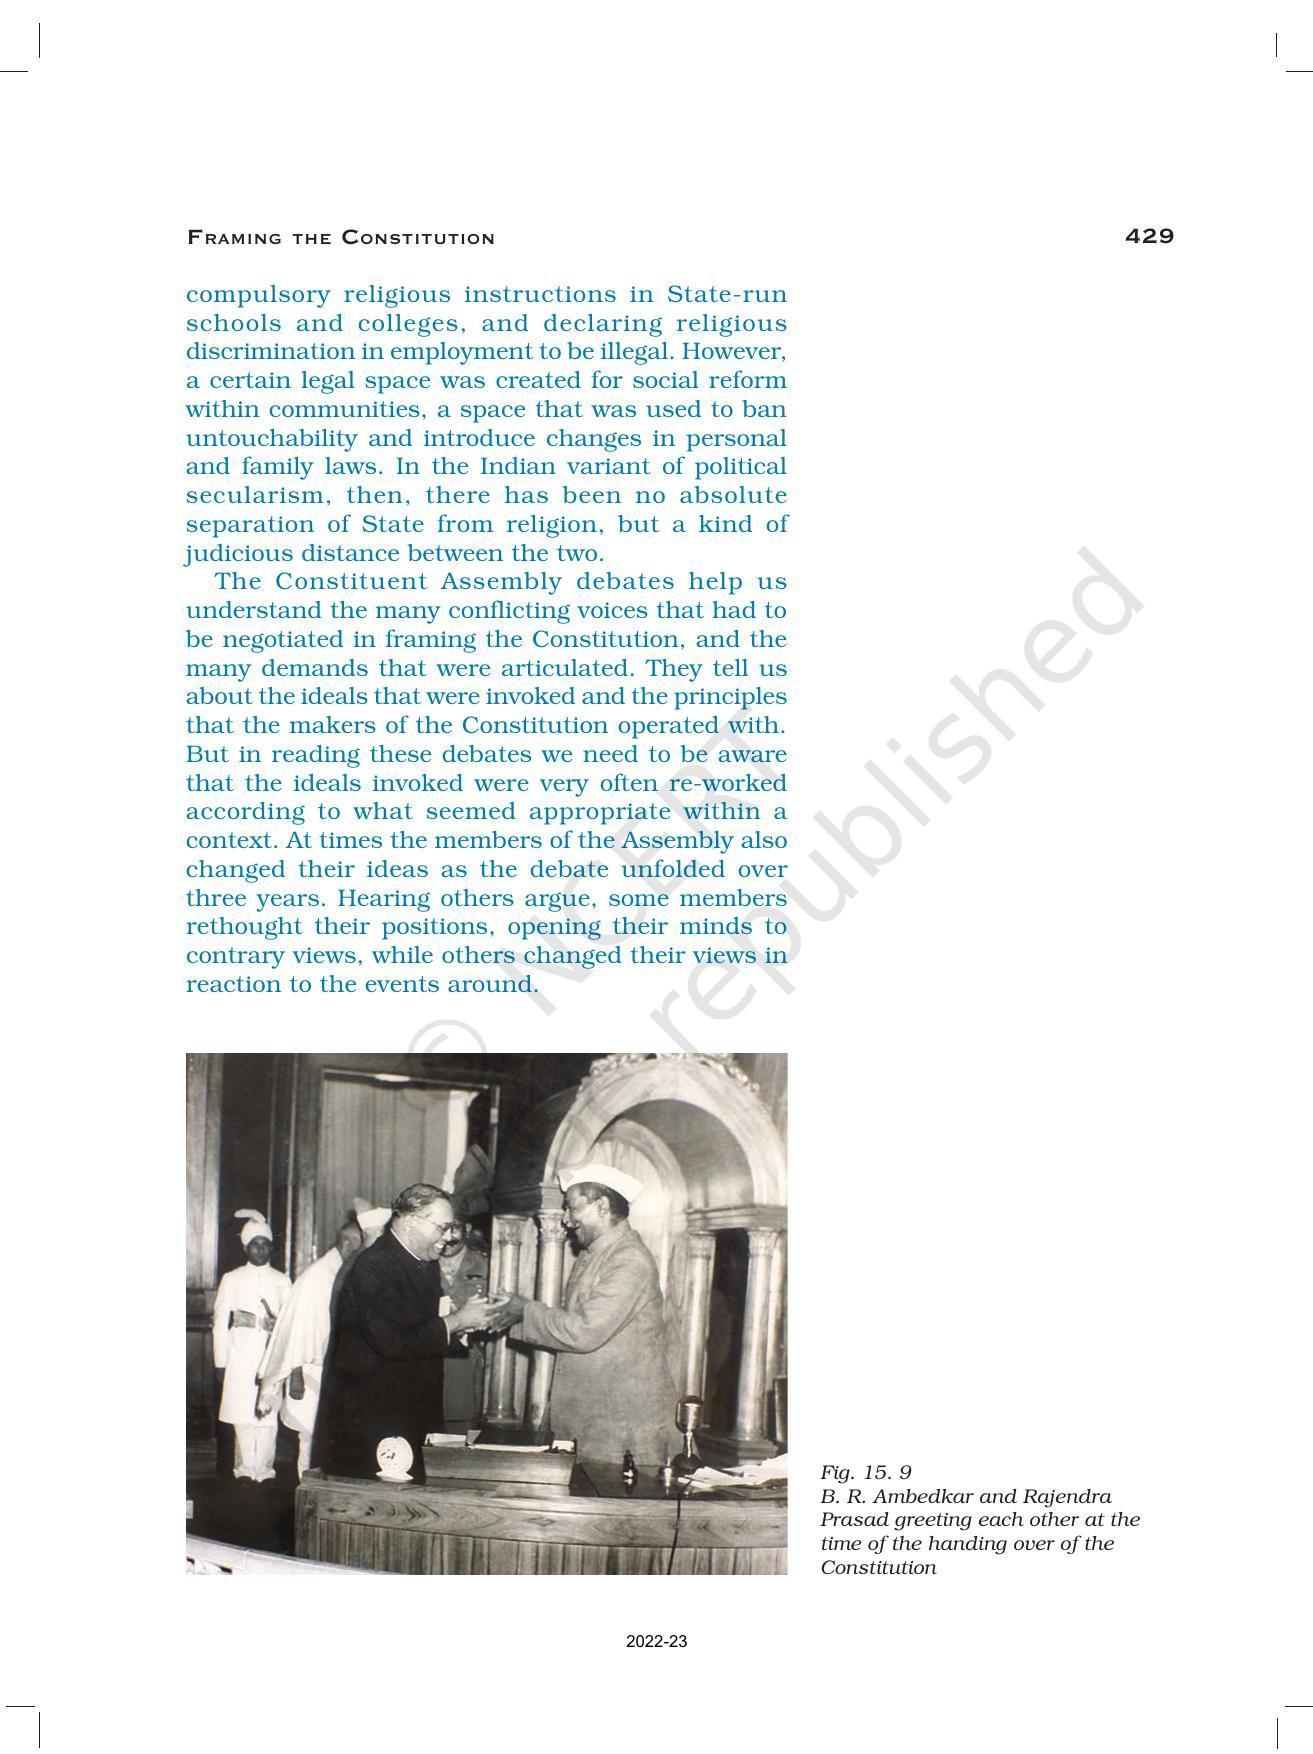 NCERT Book for Class 12 History (Part-III) Chapter 15 Framing and the Constitution - Page 25